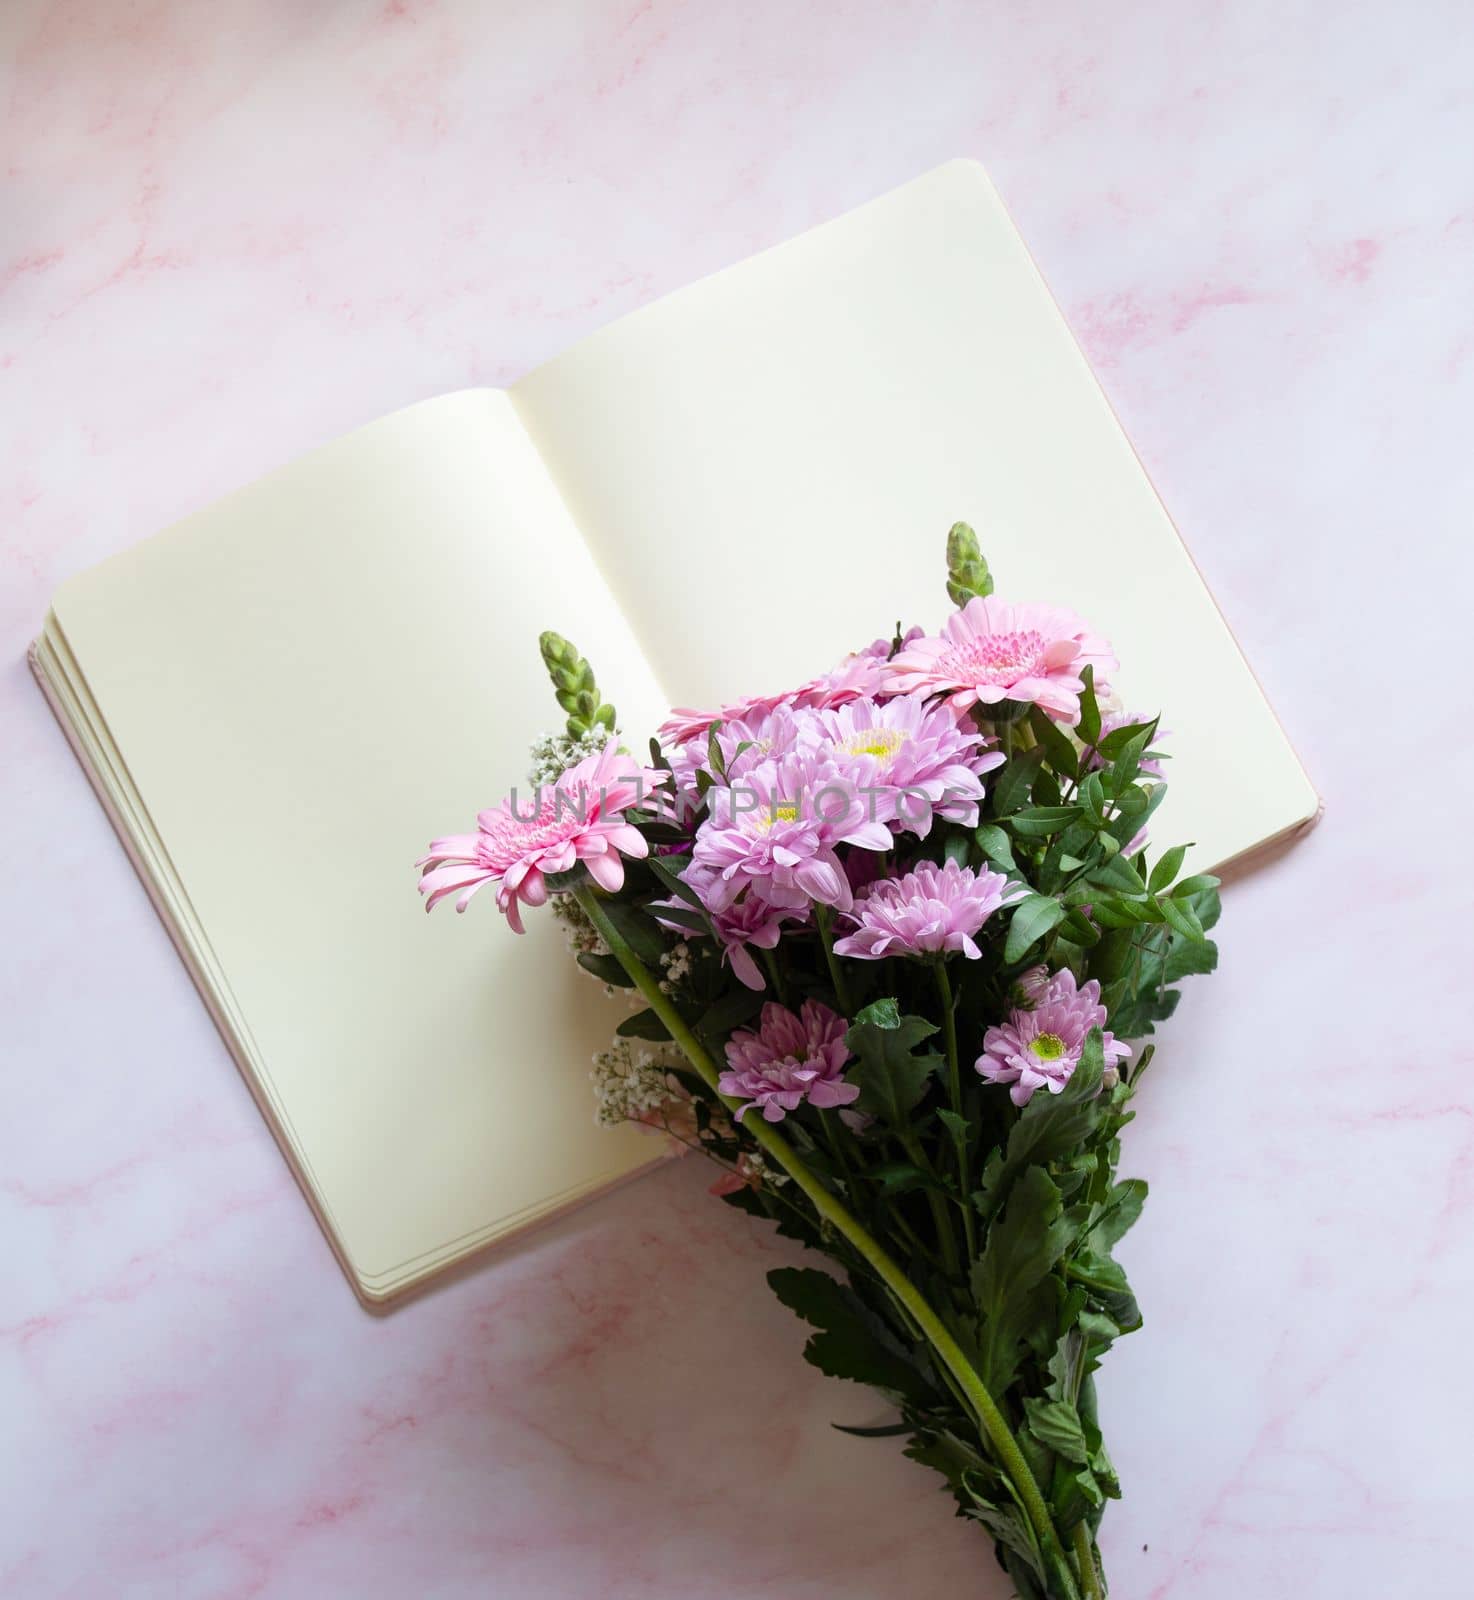 bouquet with pink gerberas and chrysanthemums and blank notebook for sketching and notes, pink. High quality photo